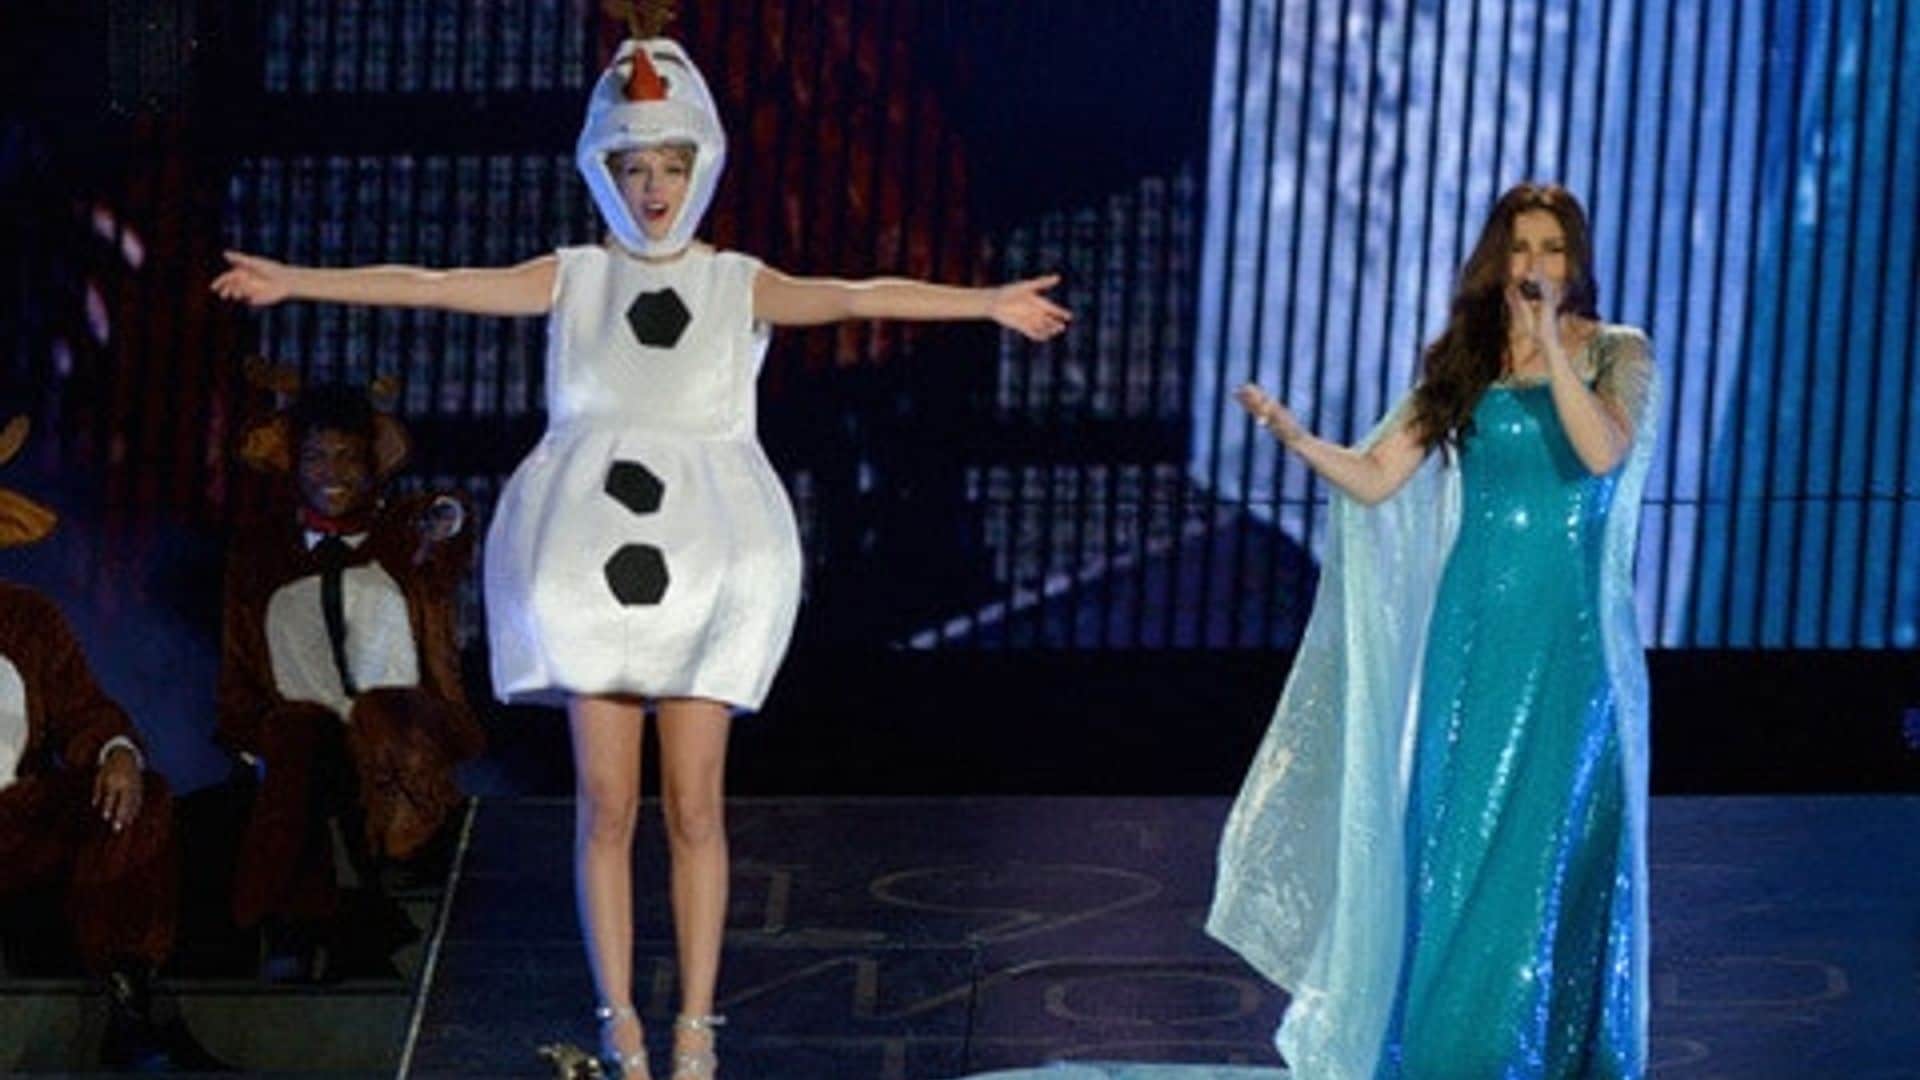 An Olaf-clad Taylor Swift was joined on stage by Idina Menzel in Tampa, Florida, where the two belted out the 'Frozen' hit "Let It Go."
Photo: Getty Images